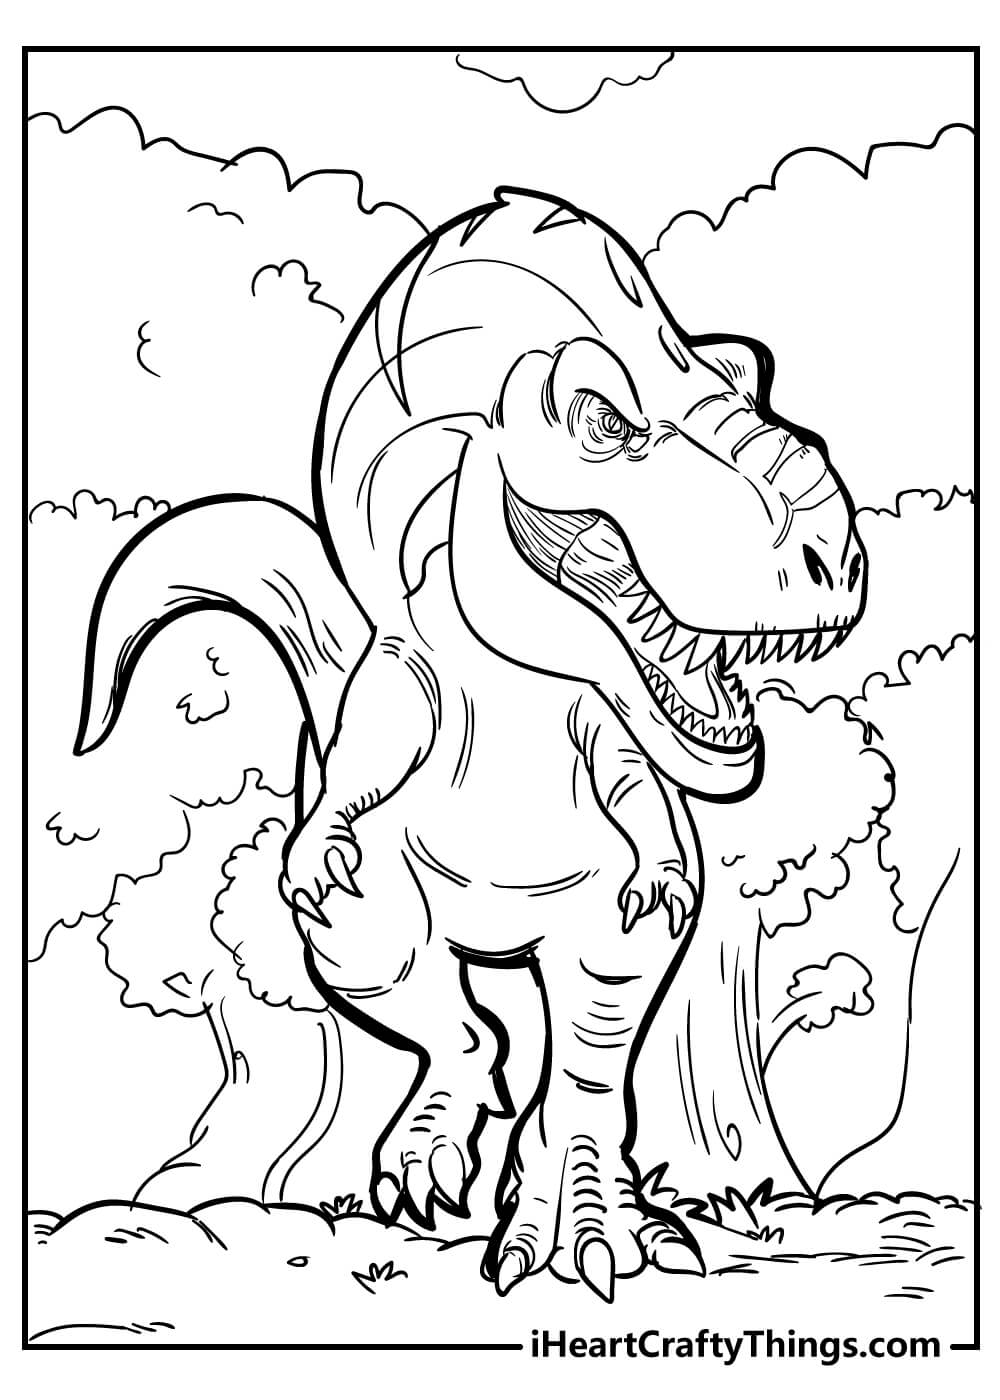 toy story rex coloring page | t rex coloring pages for preschoolers | jurassic world t rex coloring pages